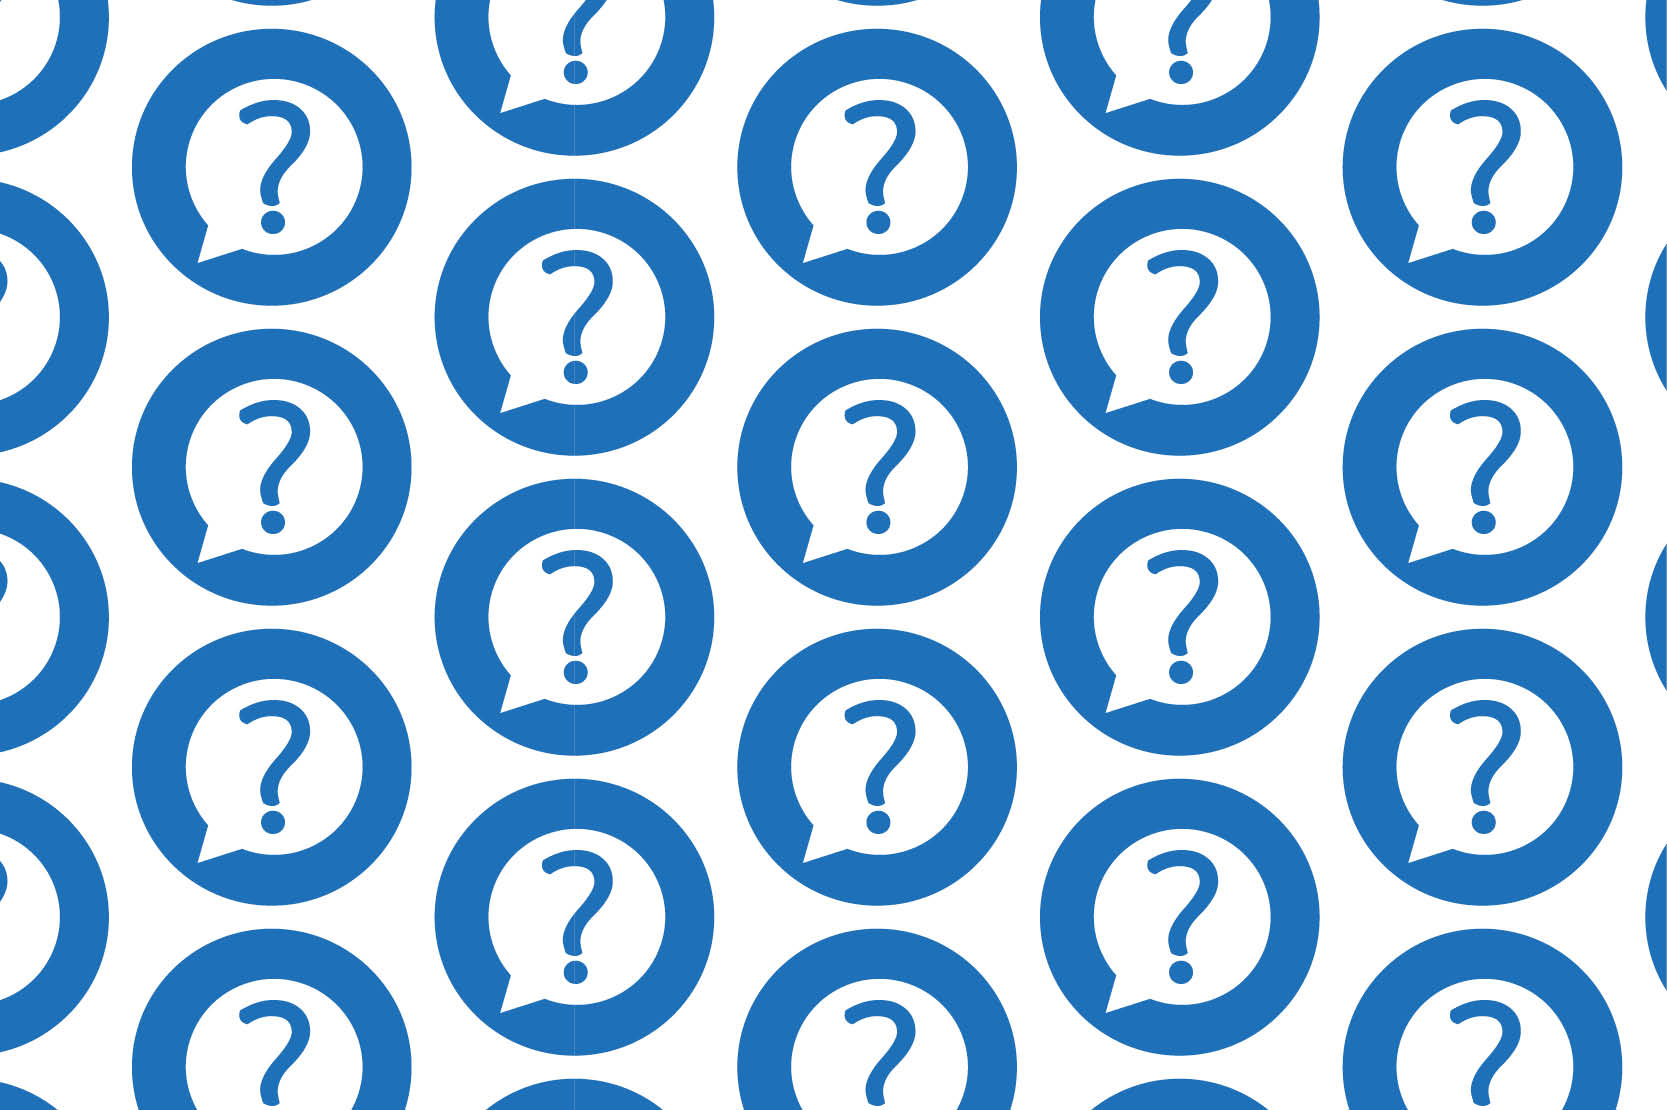 An illustration containing a repeating pattern of question marks